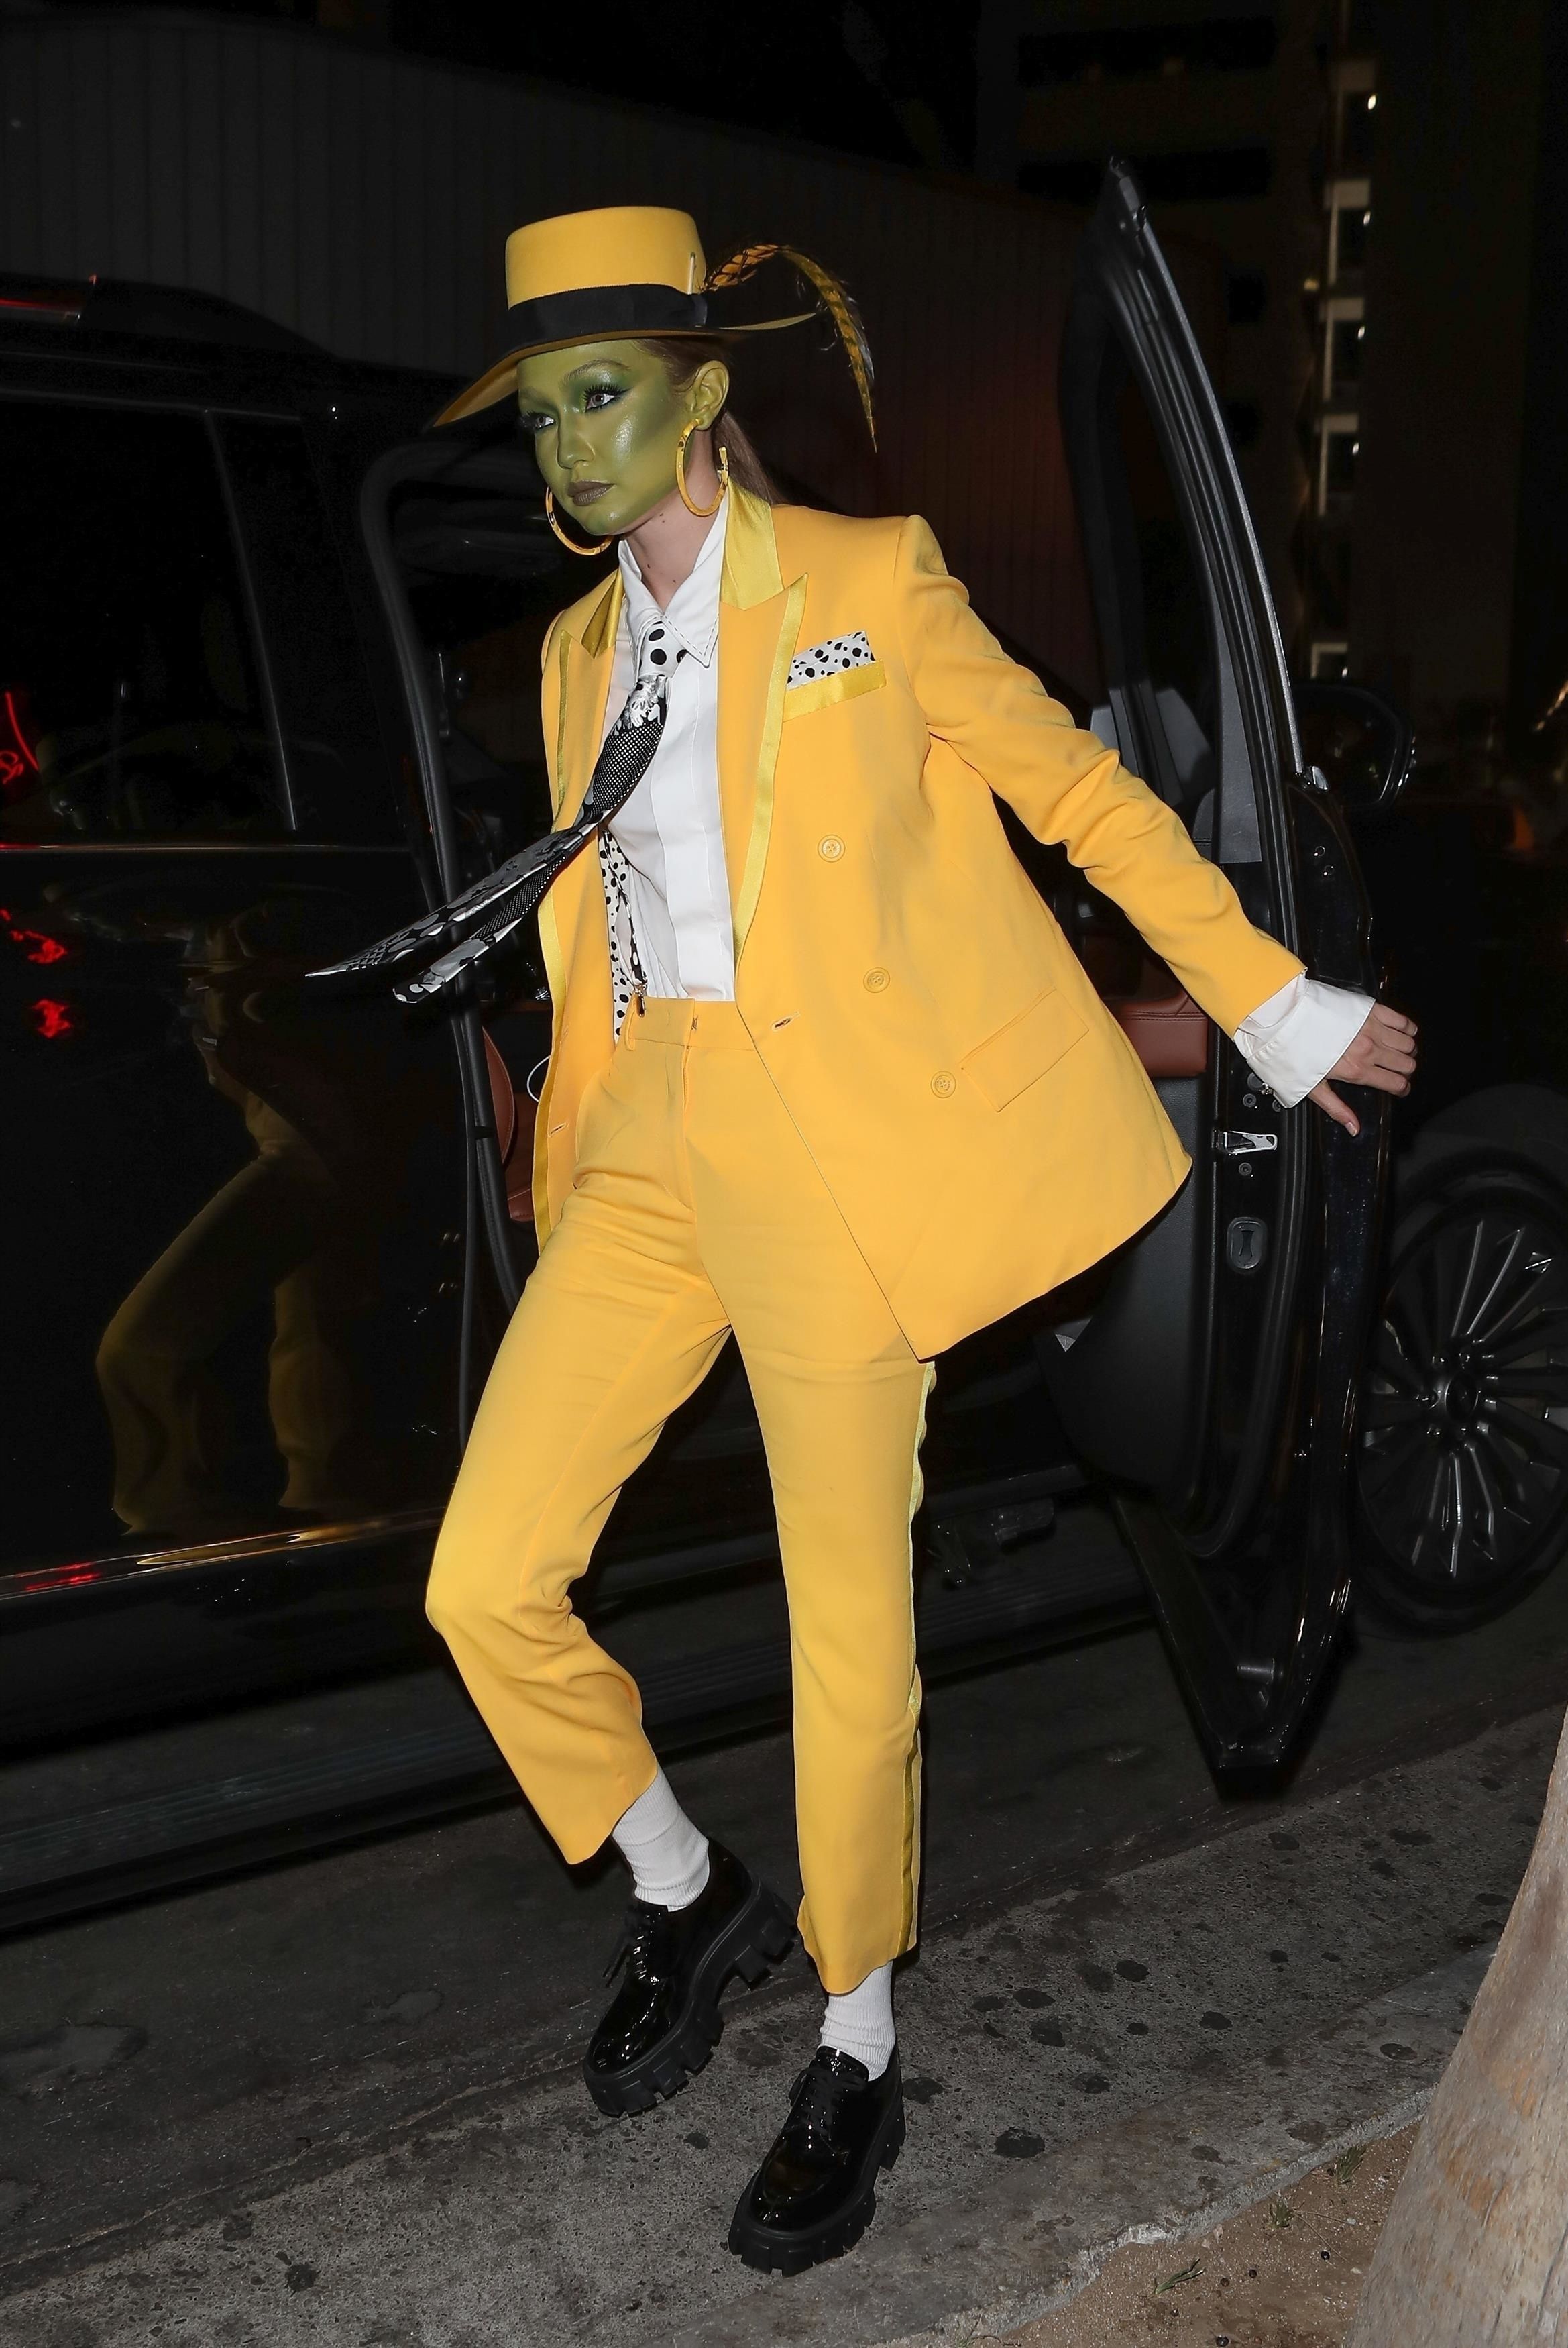 Gigi Hadid Dresses As A High Fashion Version Of The Mask For